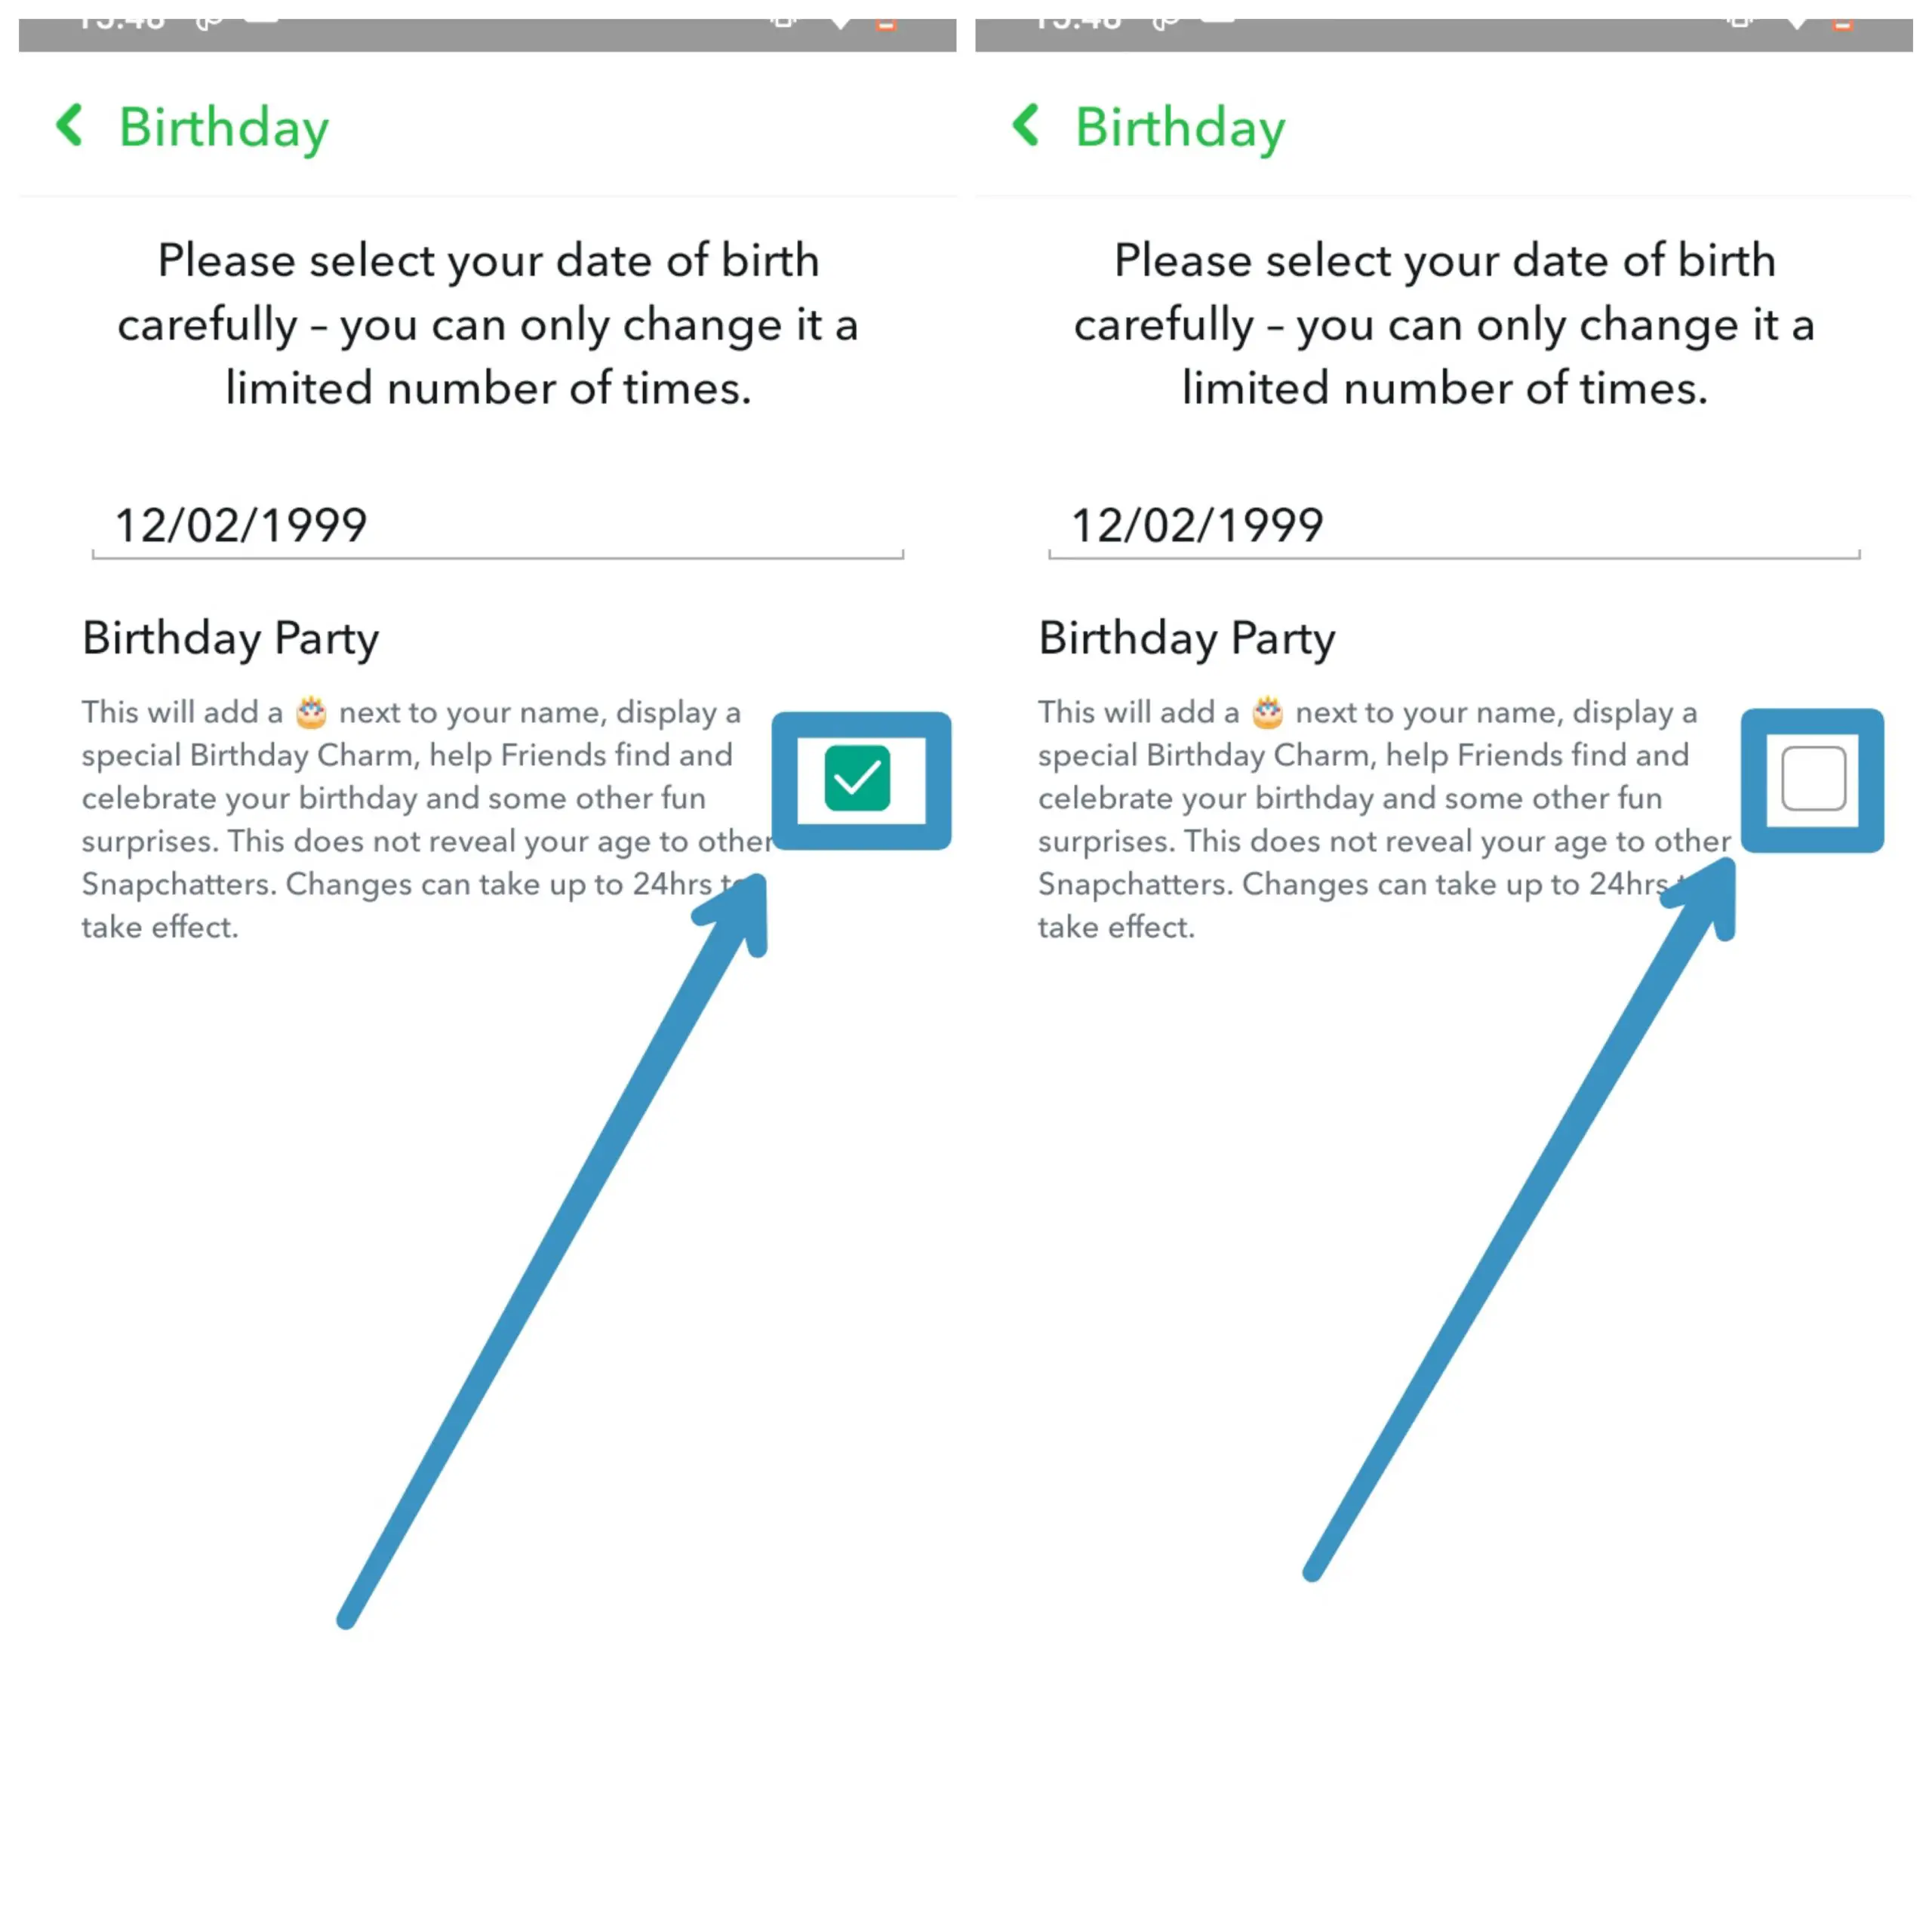 Step 6: Toggle The Birthday Party Option Off